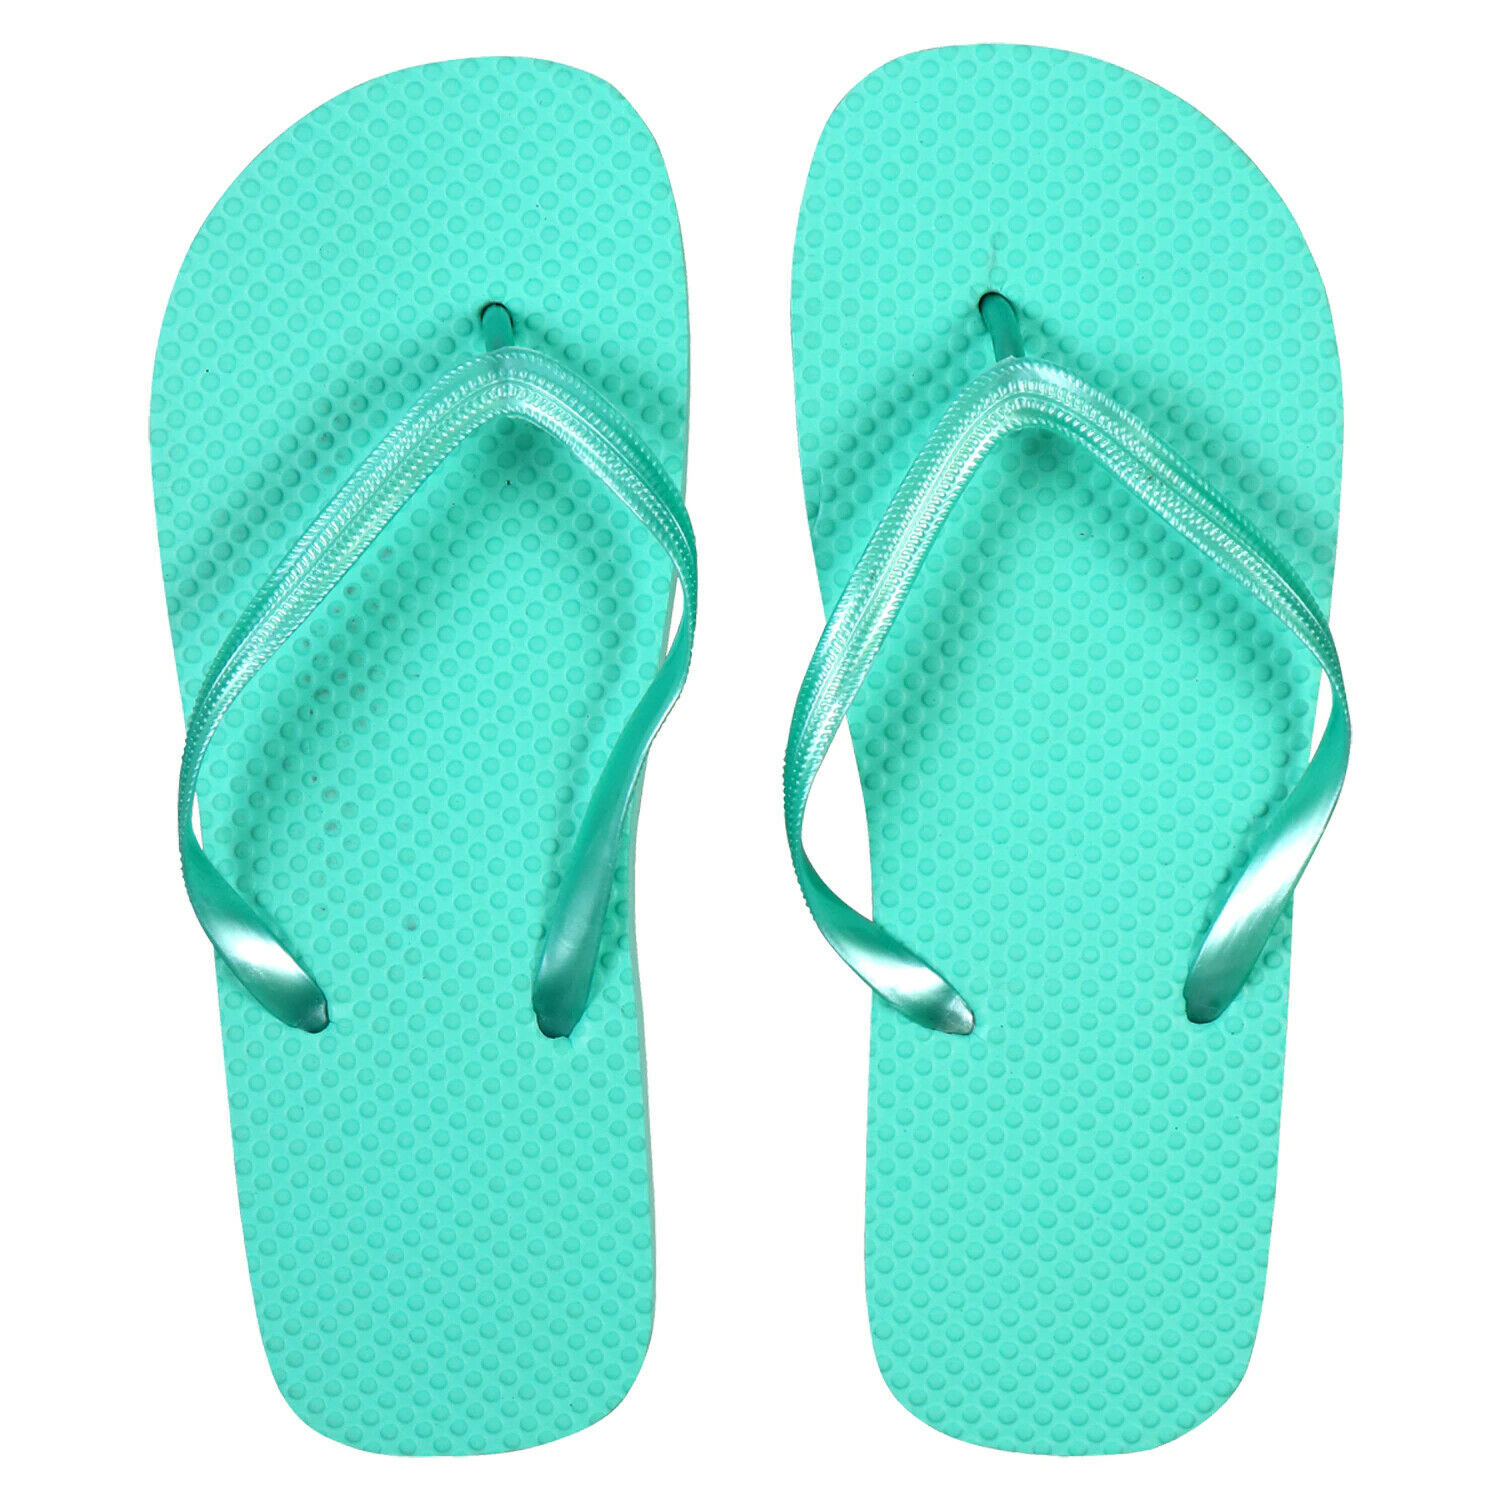 Primary image for Juncture Ladies' Solid Color Rubber Flip Flops - teal - size med - 7/8 - new